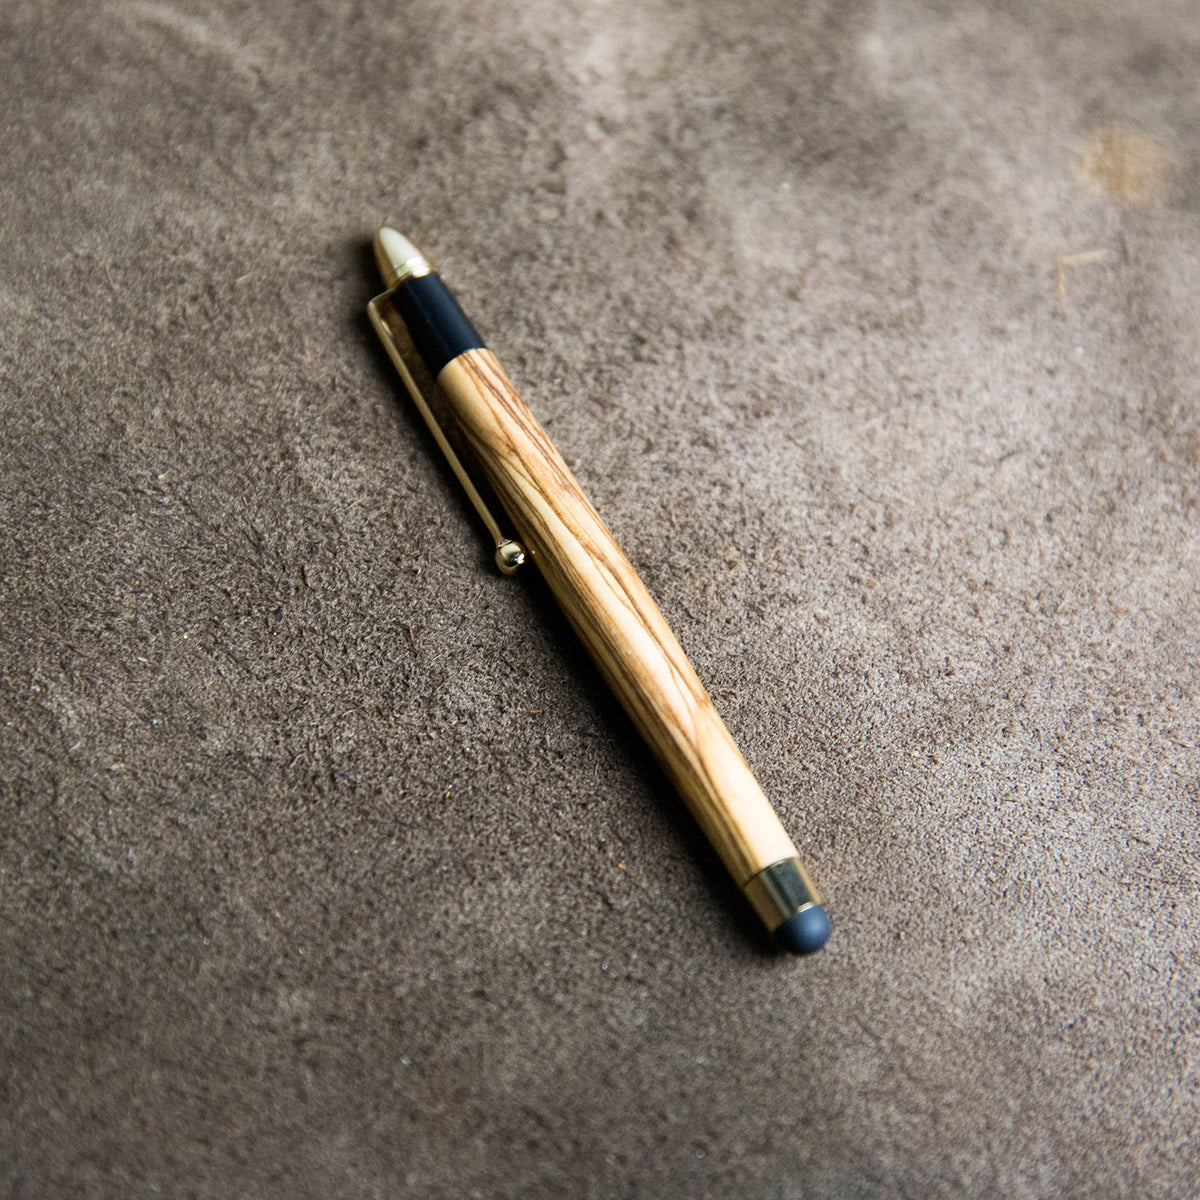 Olive wood stylus from Holtz Leather Co in Huntsville, Alabama